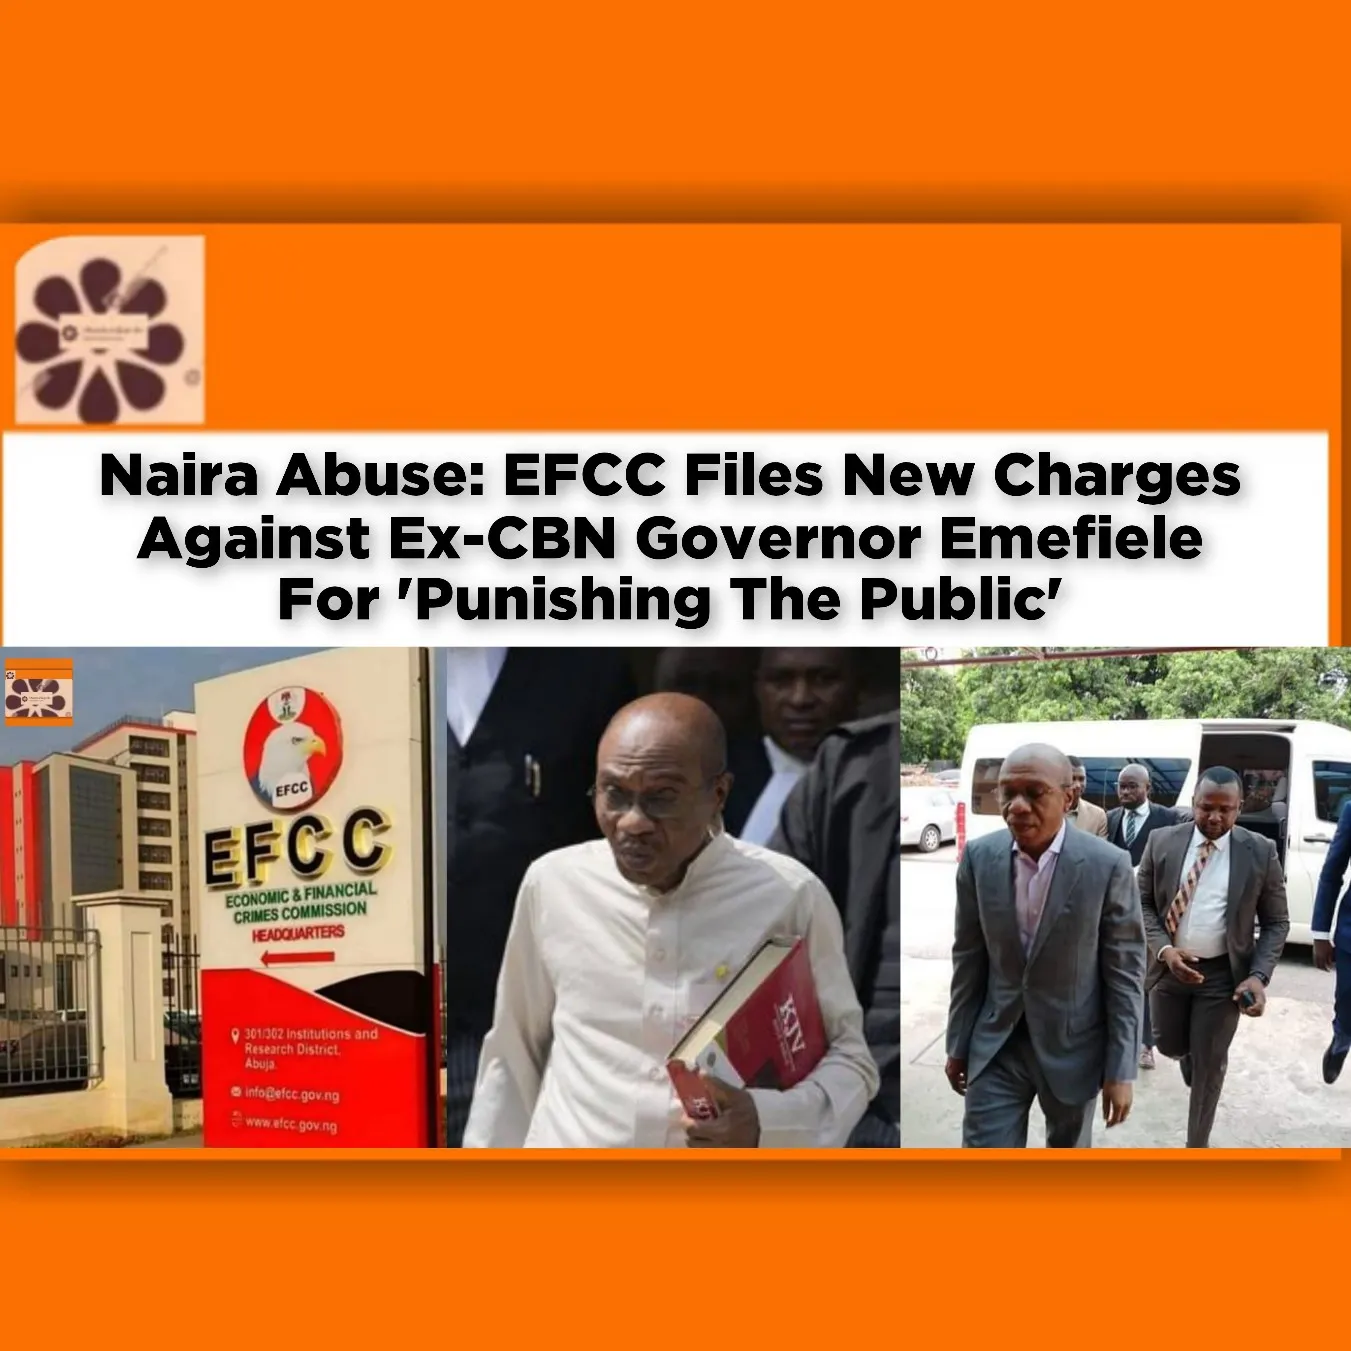 Naira Abuse: EFCC Files New Charges Against Ex-CBN Governor Emefiele For 'Punishing The Public' ~ OsazuwaAkonedo #Abba